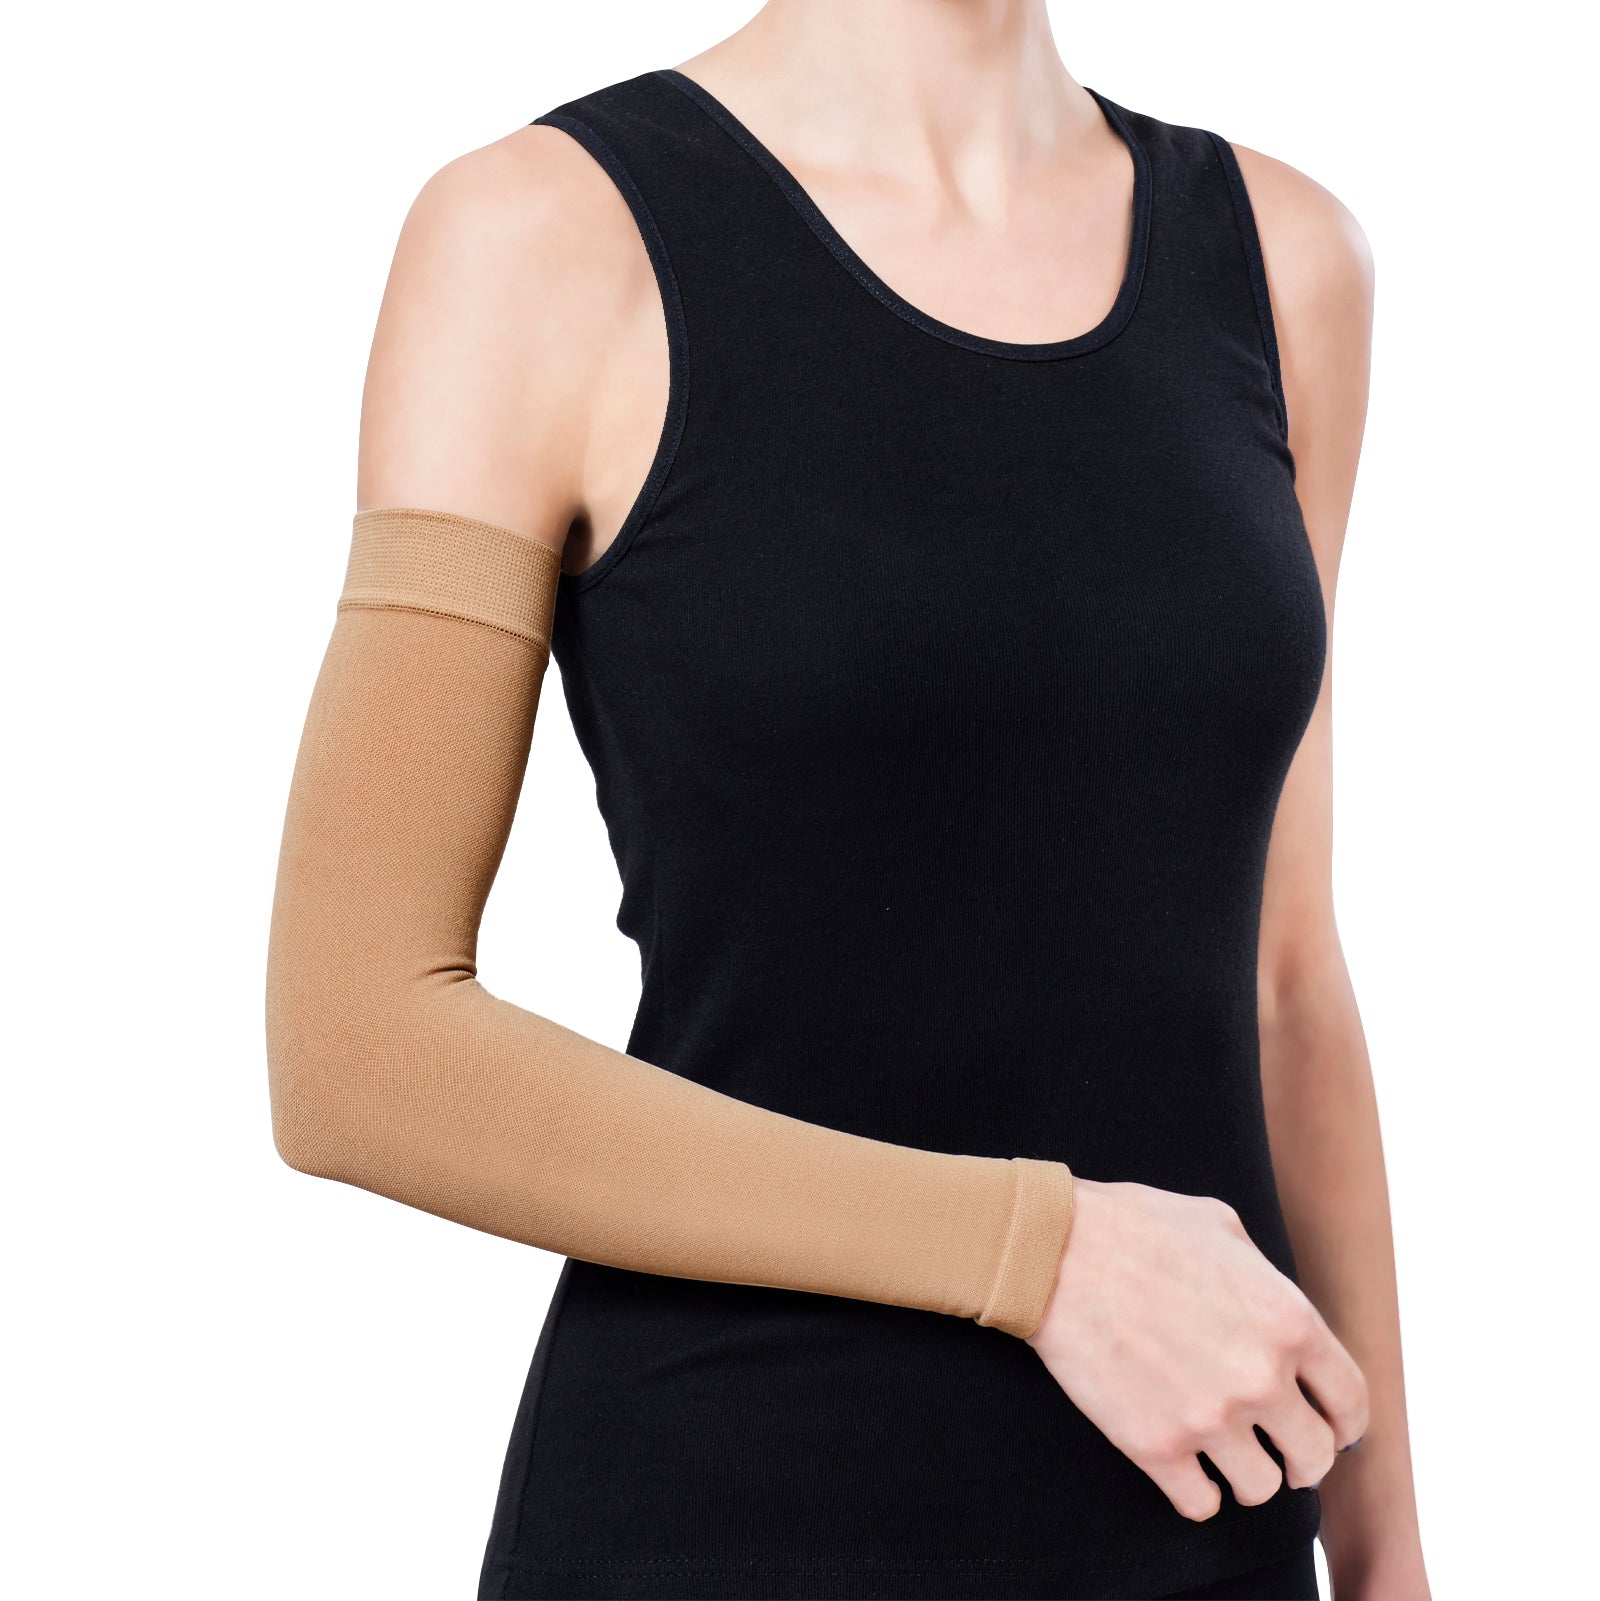 High Compression Massaging arms Sleeves for Lipedema, Lymphedema Diseases  (Black, XXL)